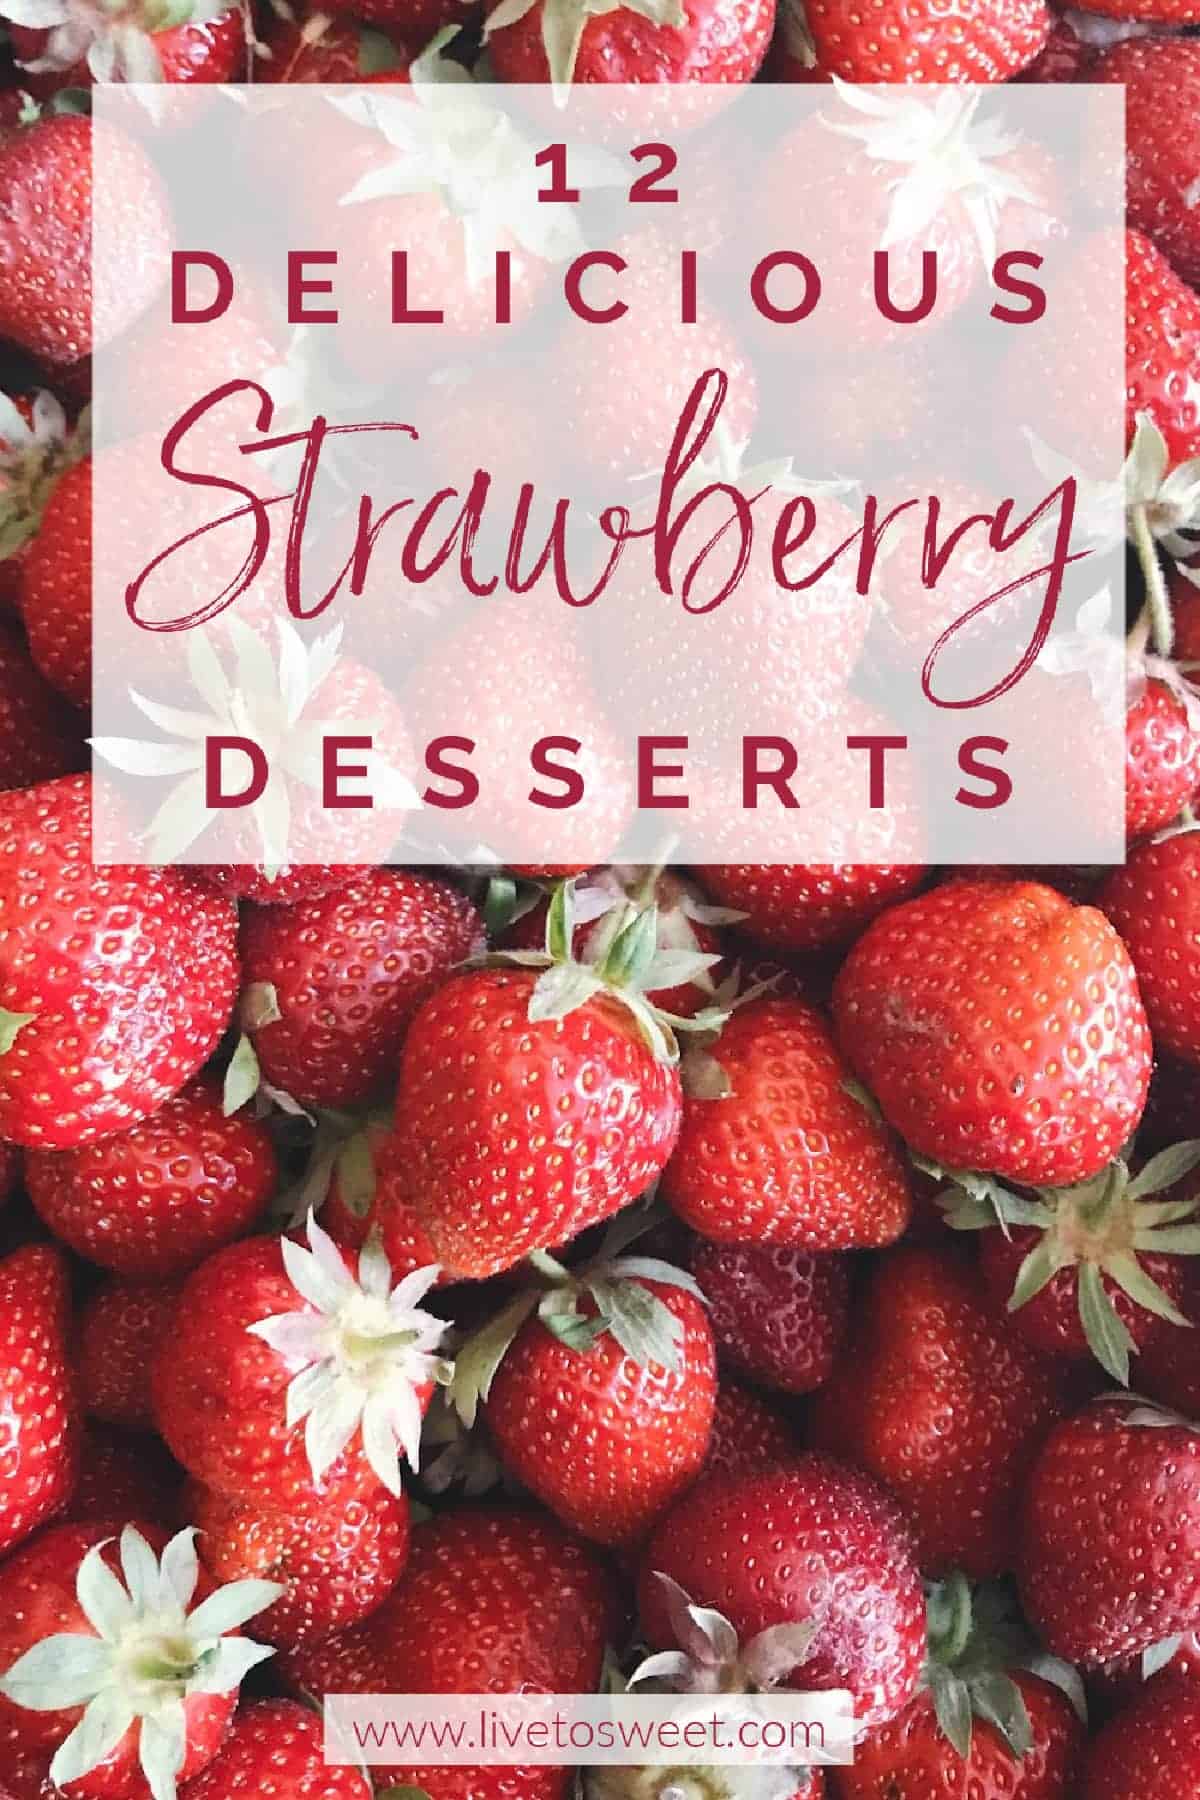 Image of strawberries with the text "12 Delicious Strawberry Desserts" on top.